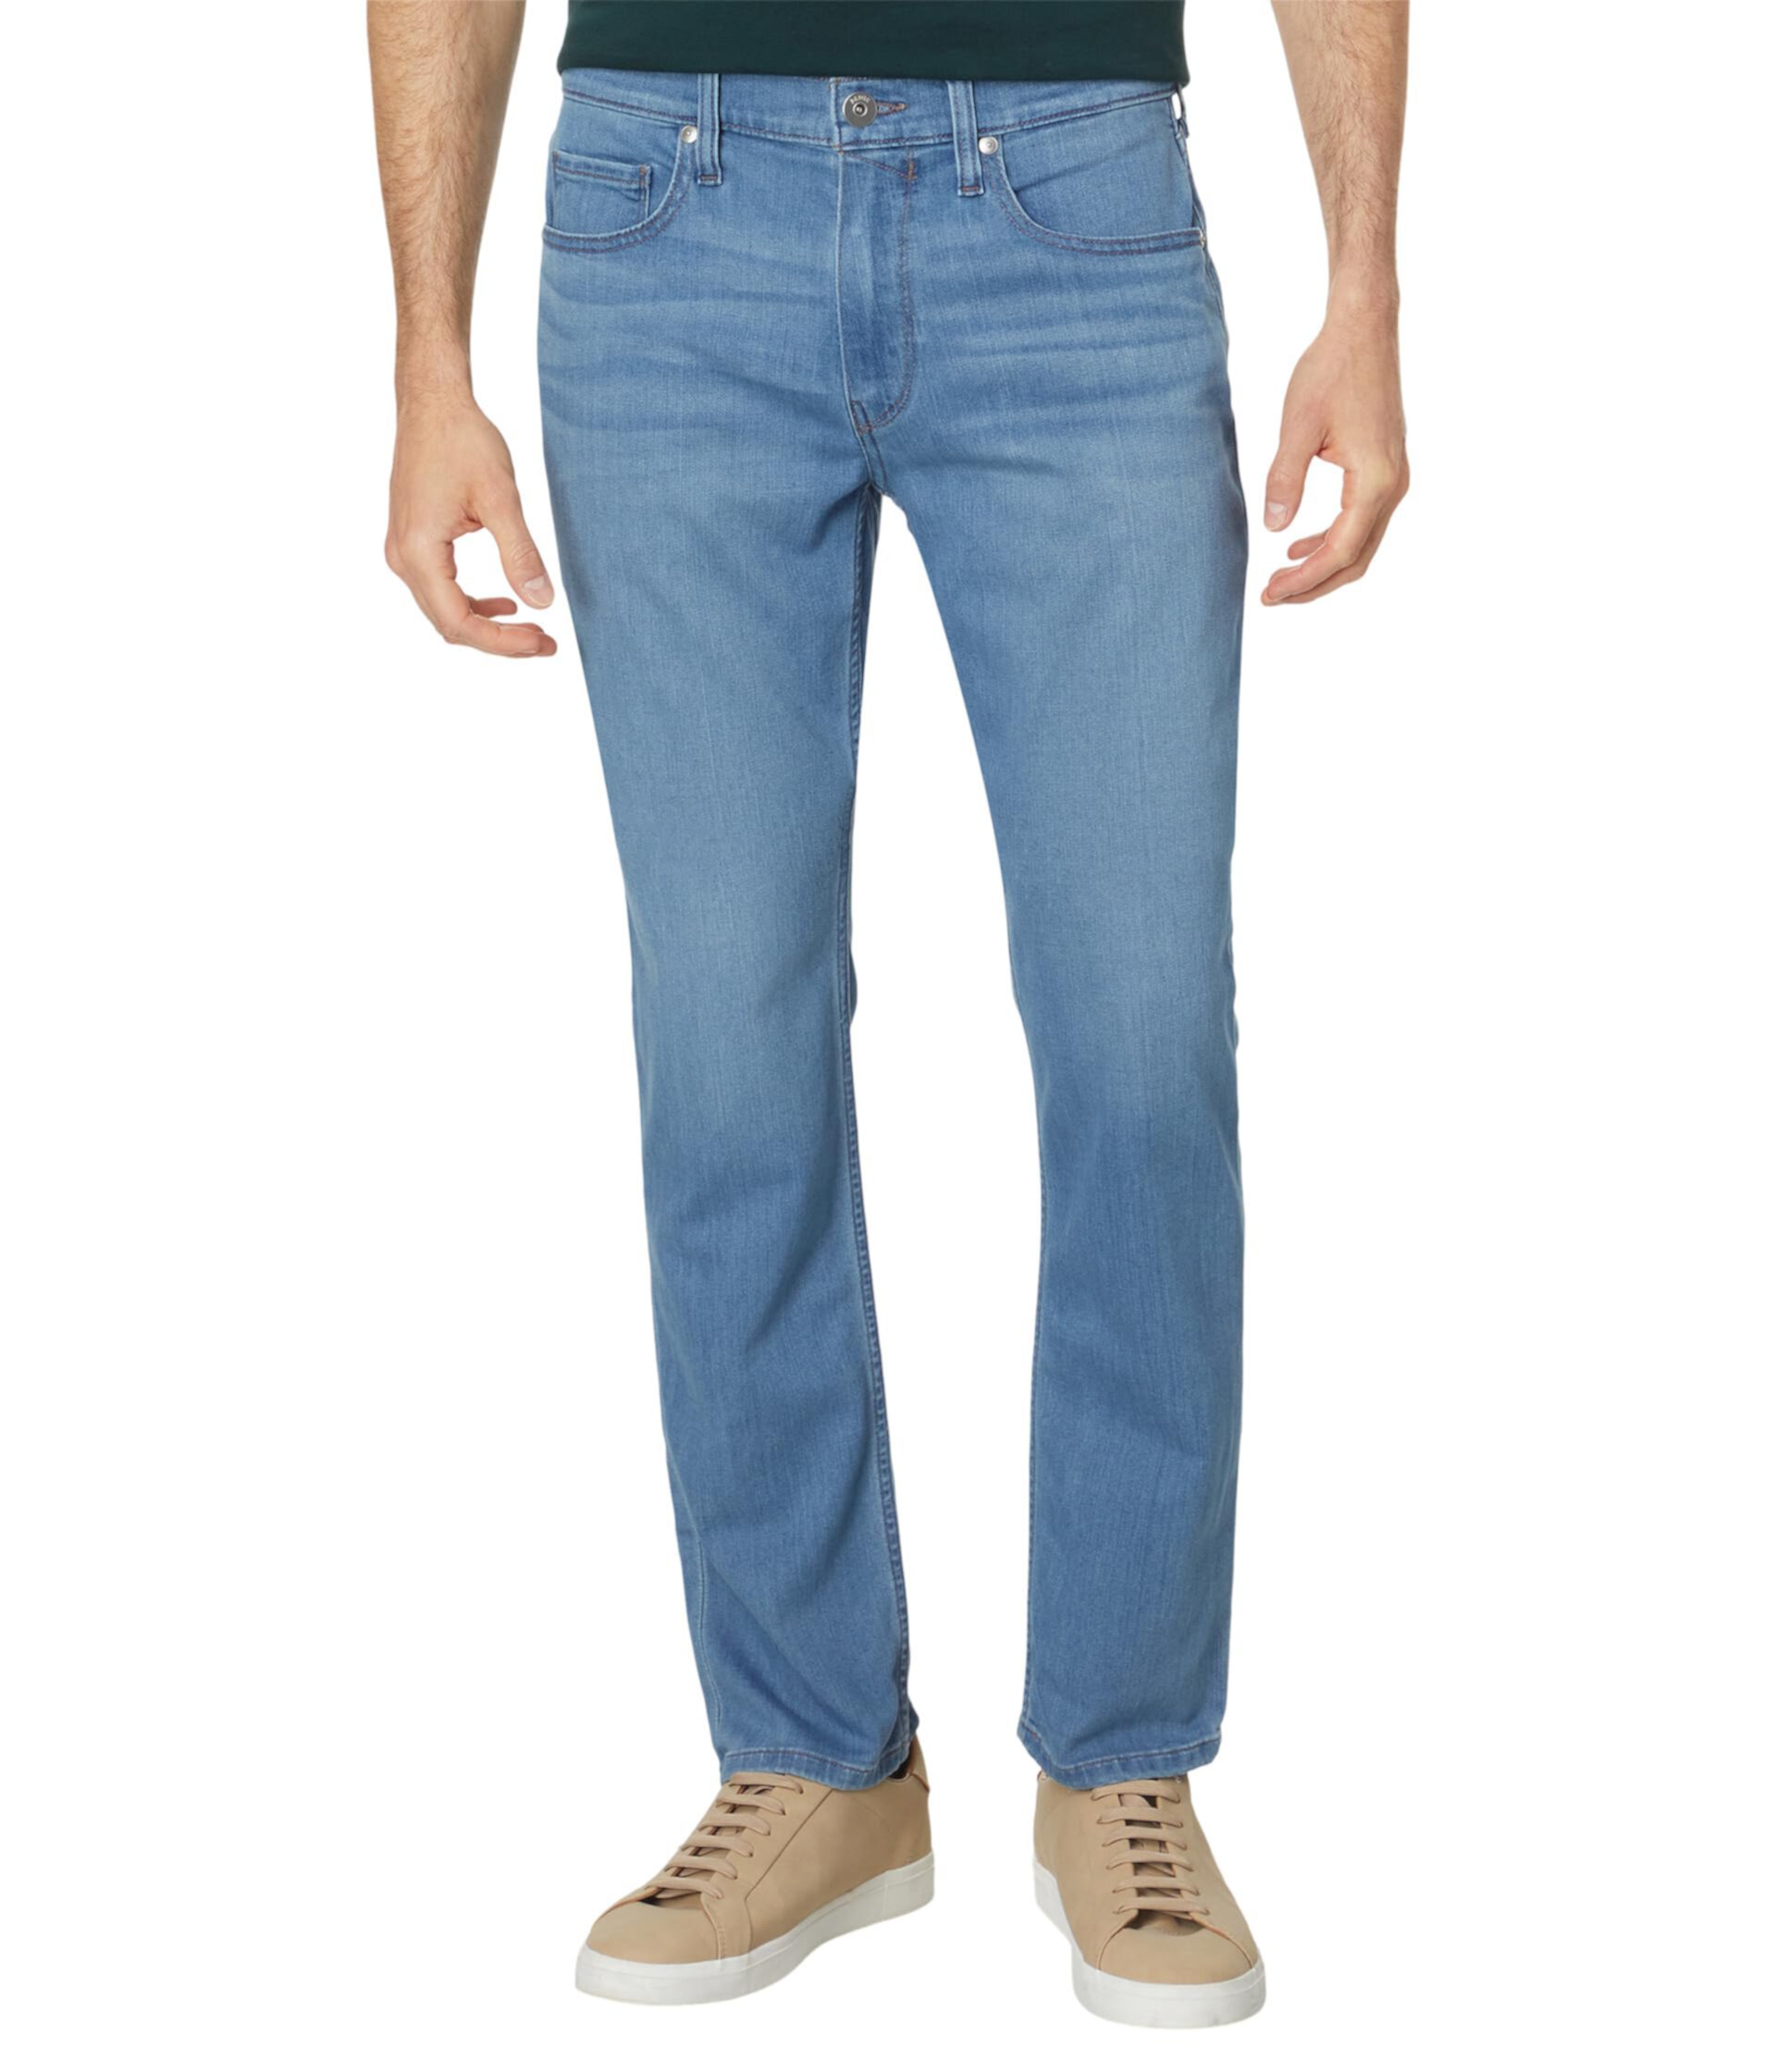 Federal Transcend Slim Straight Fit Jeans in Robby Paige